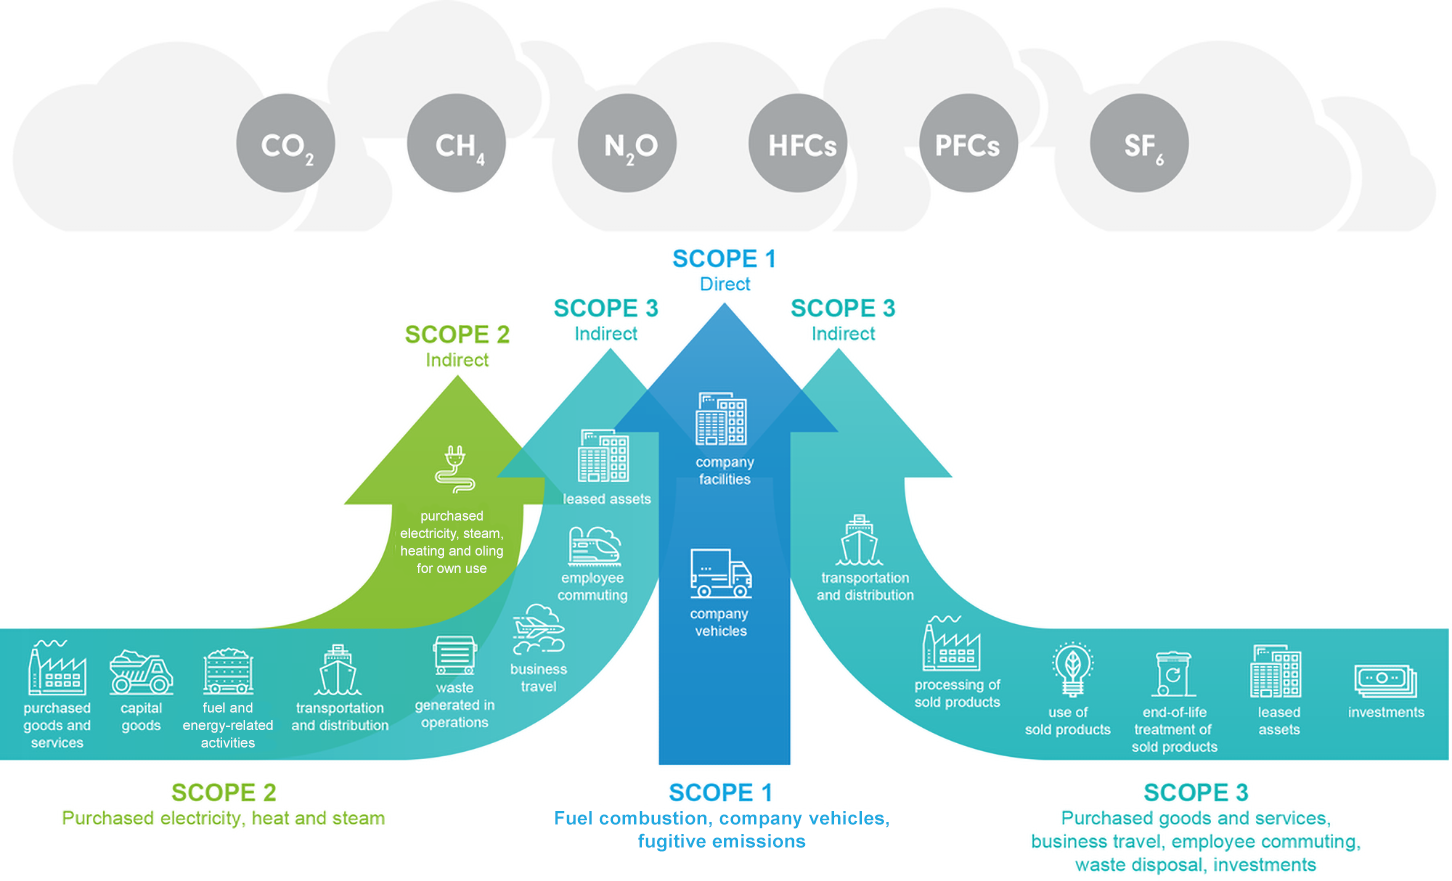 The Greenhouse Gas Protocol has three scopes. Scope 1, or direct emissions, includes fuel combustion, company vehicles and fugitive emissions from company facilities and company vehicles.  Scope 2, or indirect emissions, includes purchased electricity, heat and steam from purchased electricity, steam, heating and oiling for own use. Scope 3, or indirect emissions, includes purchased good and services, business travel, employee commuting, waste disposal and investments from leased assets, employee commuting, business travel, waste generated in operations, transportation and distribution, fuel and energy related activities, capital goods, purchased goods and services, transportation and distribution, processing of sold products, use of sold products, end-of-life treatment of sold products, leased assets and investments.  All three scopes result in C02, CH4, N2O, HFCs, PFCs and SF6. 